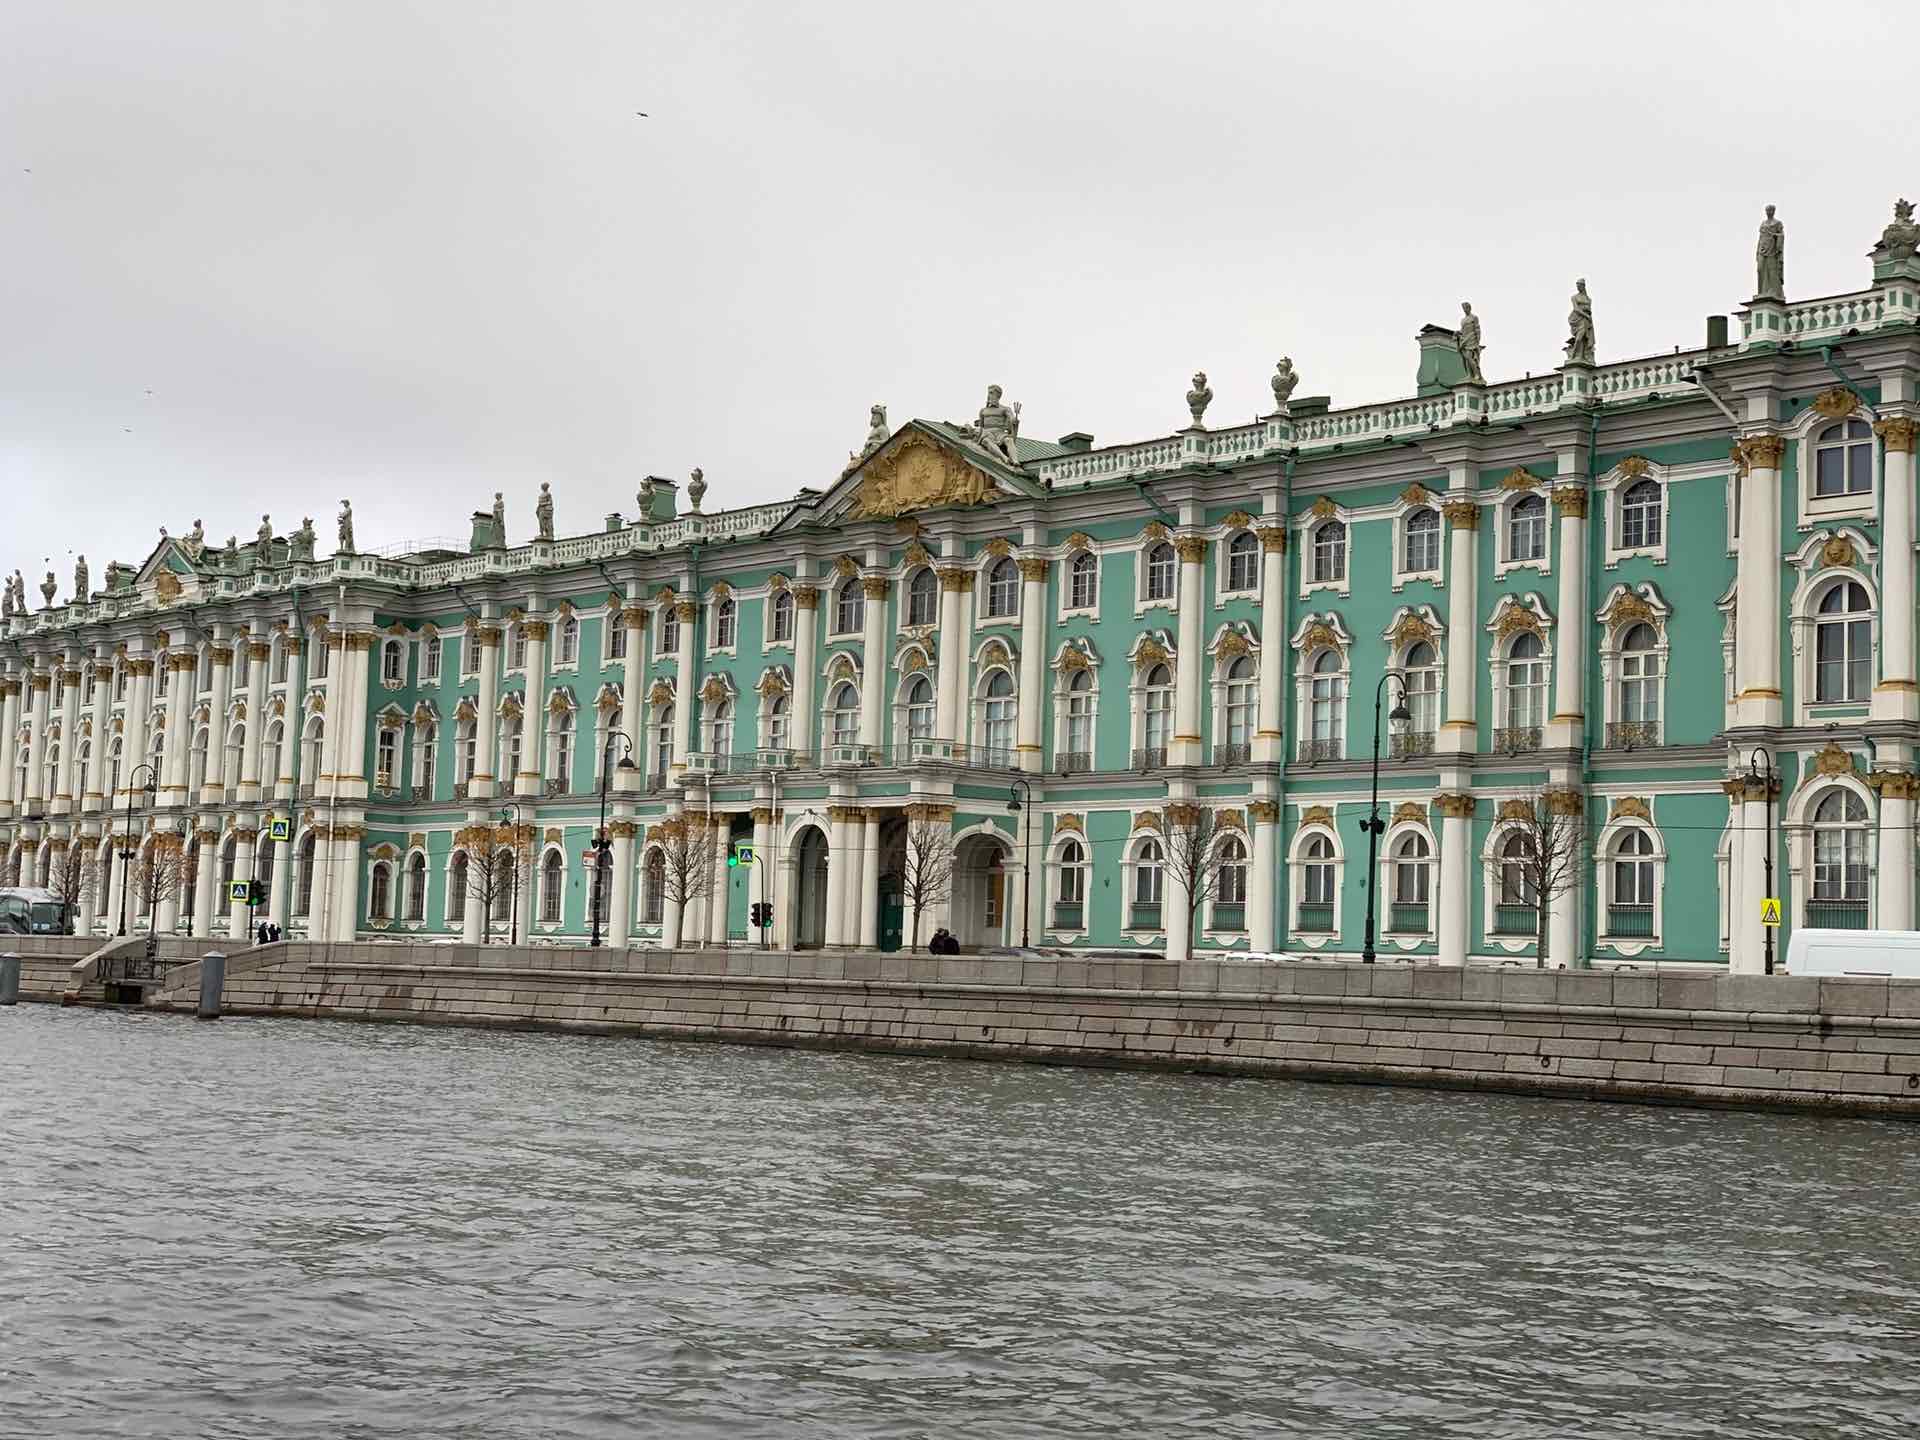 Facade of the Hermitage to the Neva river